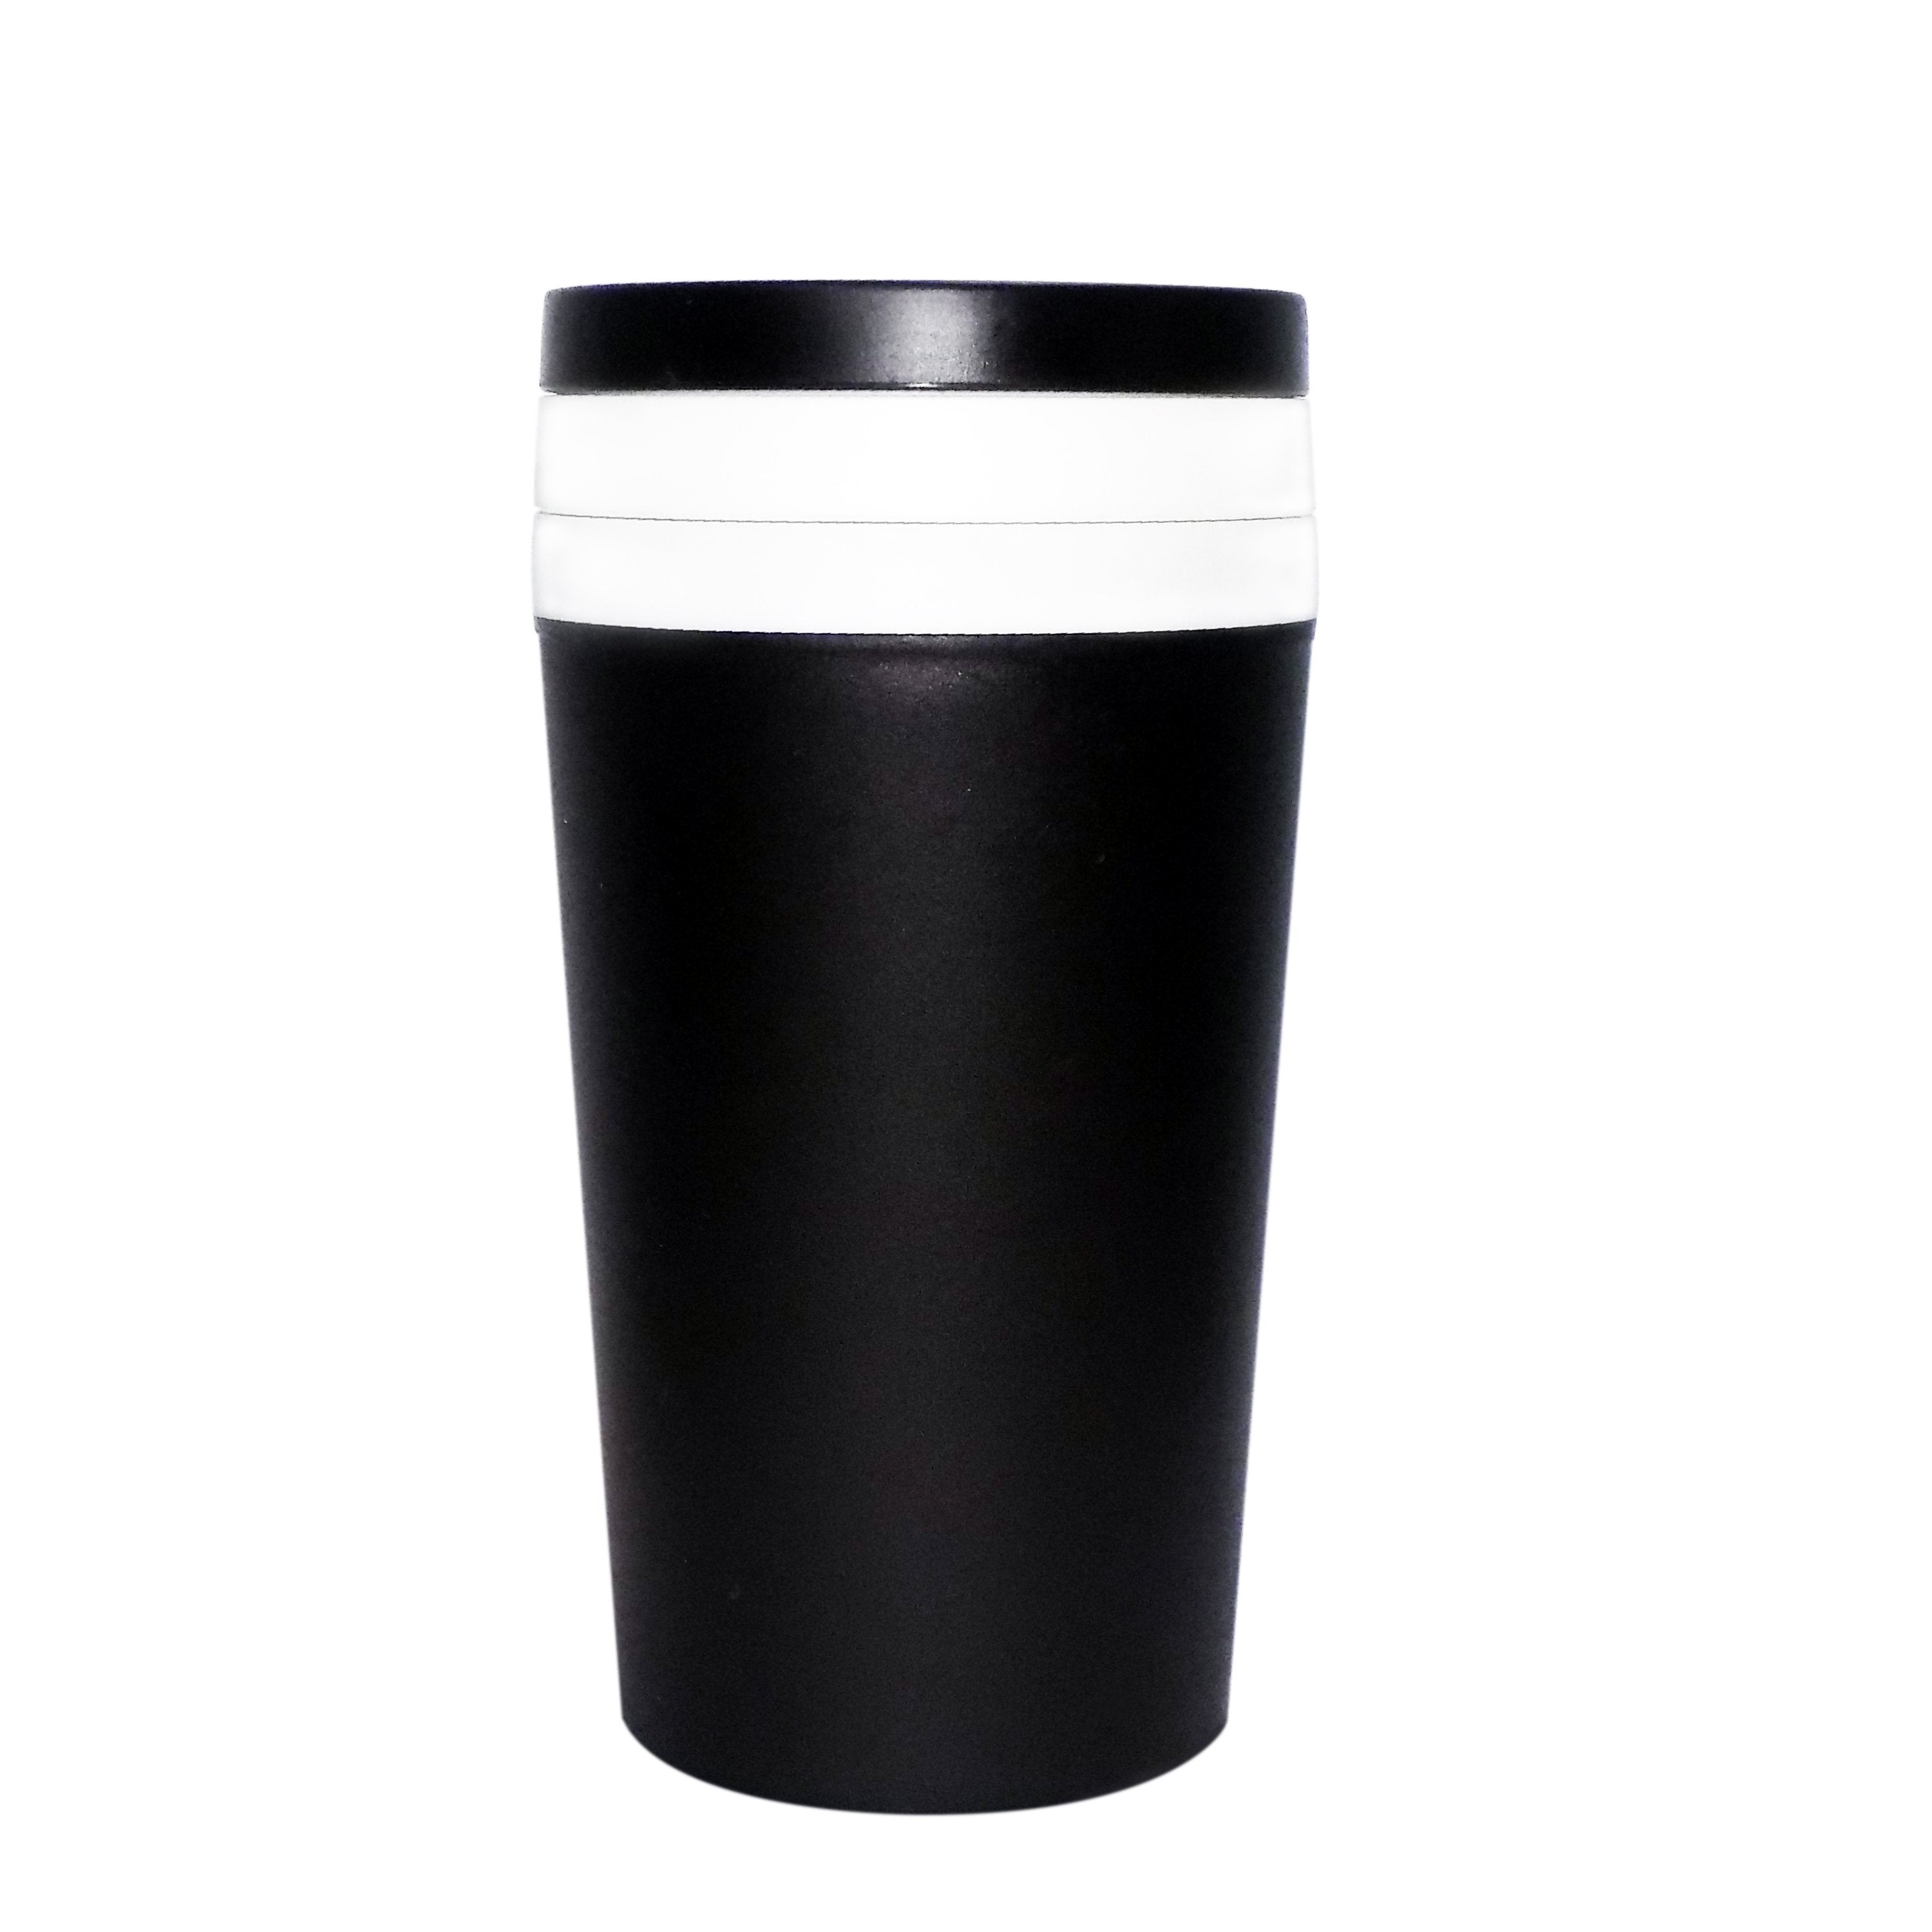 1317 3 in 1 Shaker Sipper Glass with Detachable Storage Container (300Ml) - SkyShopy